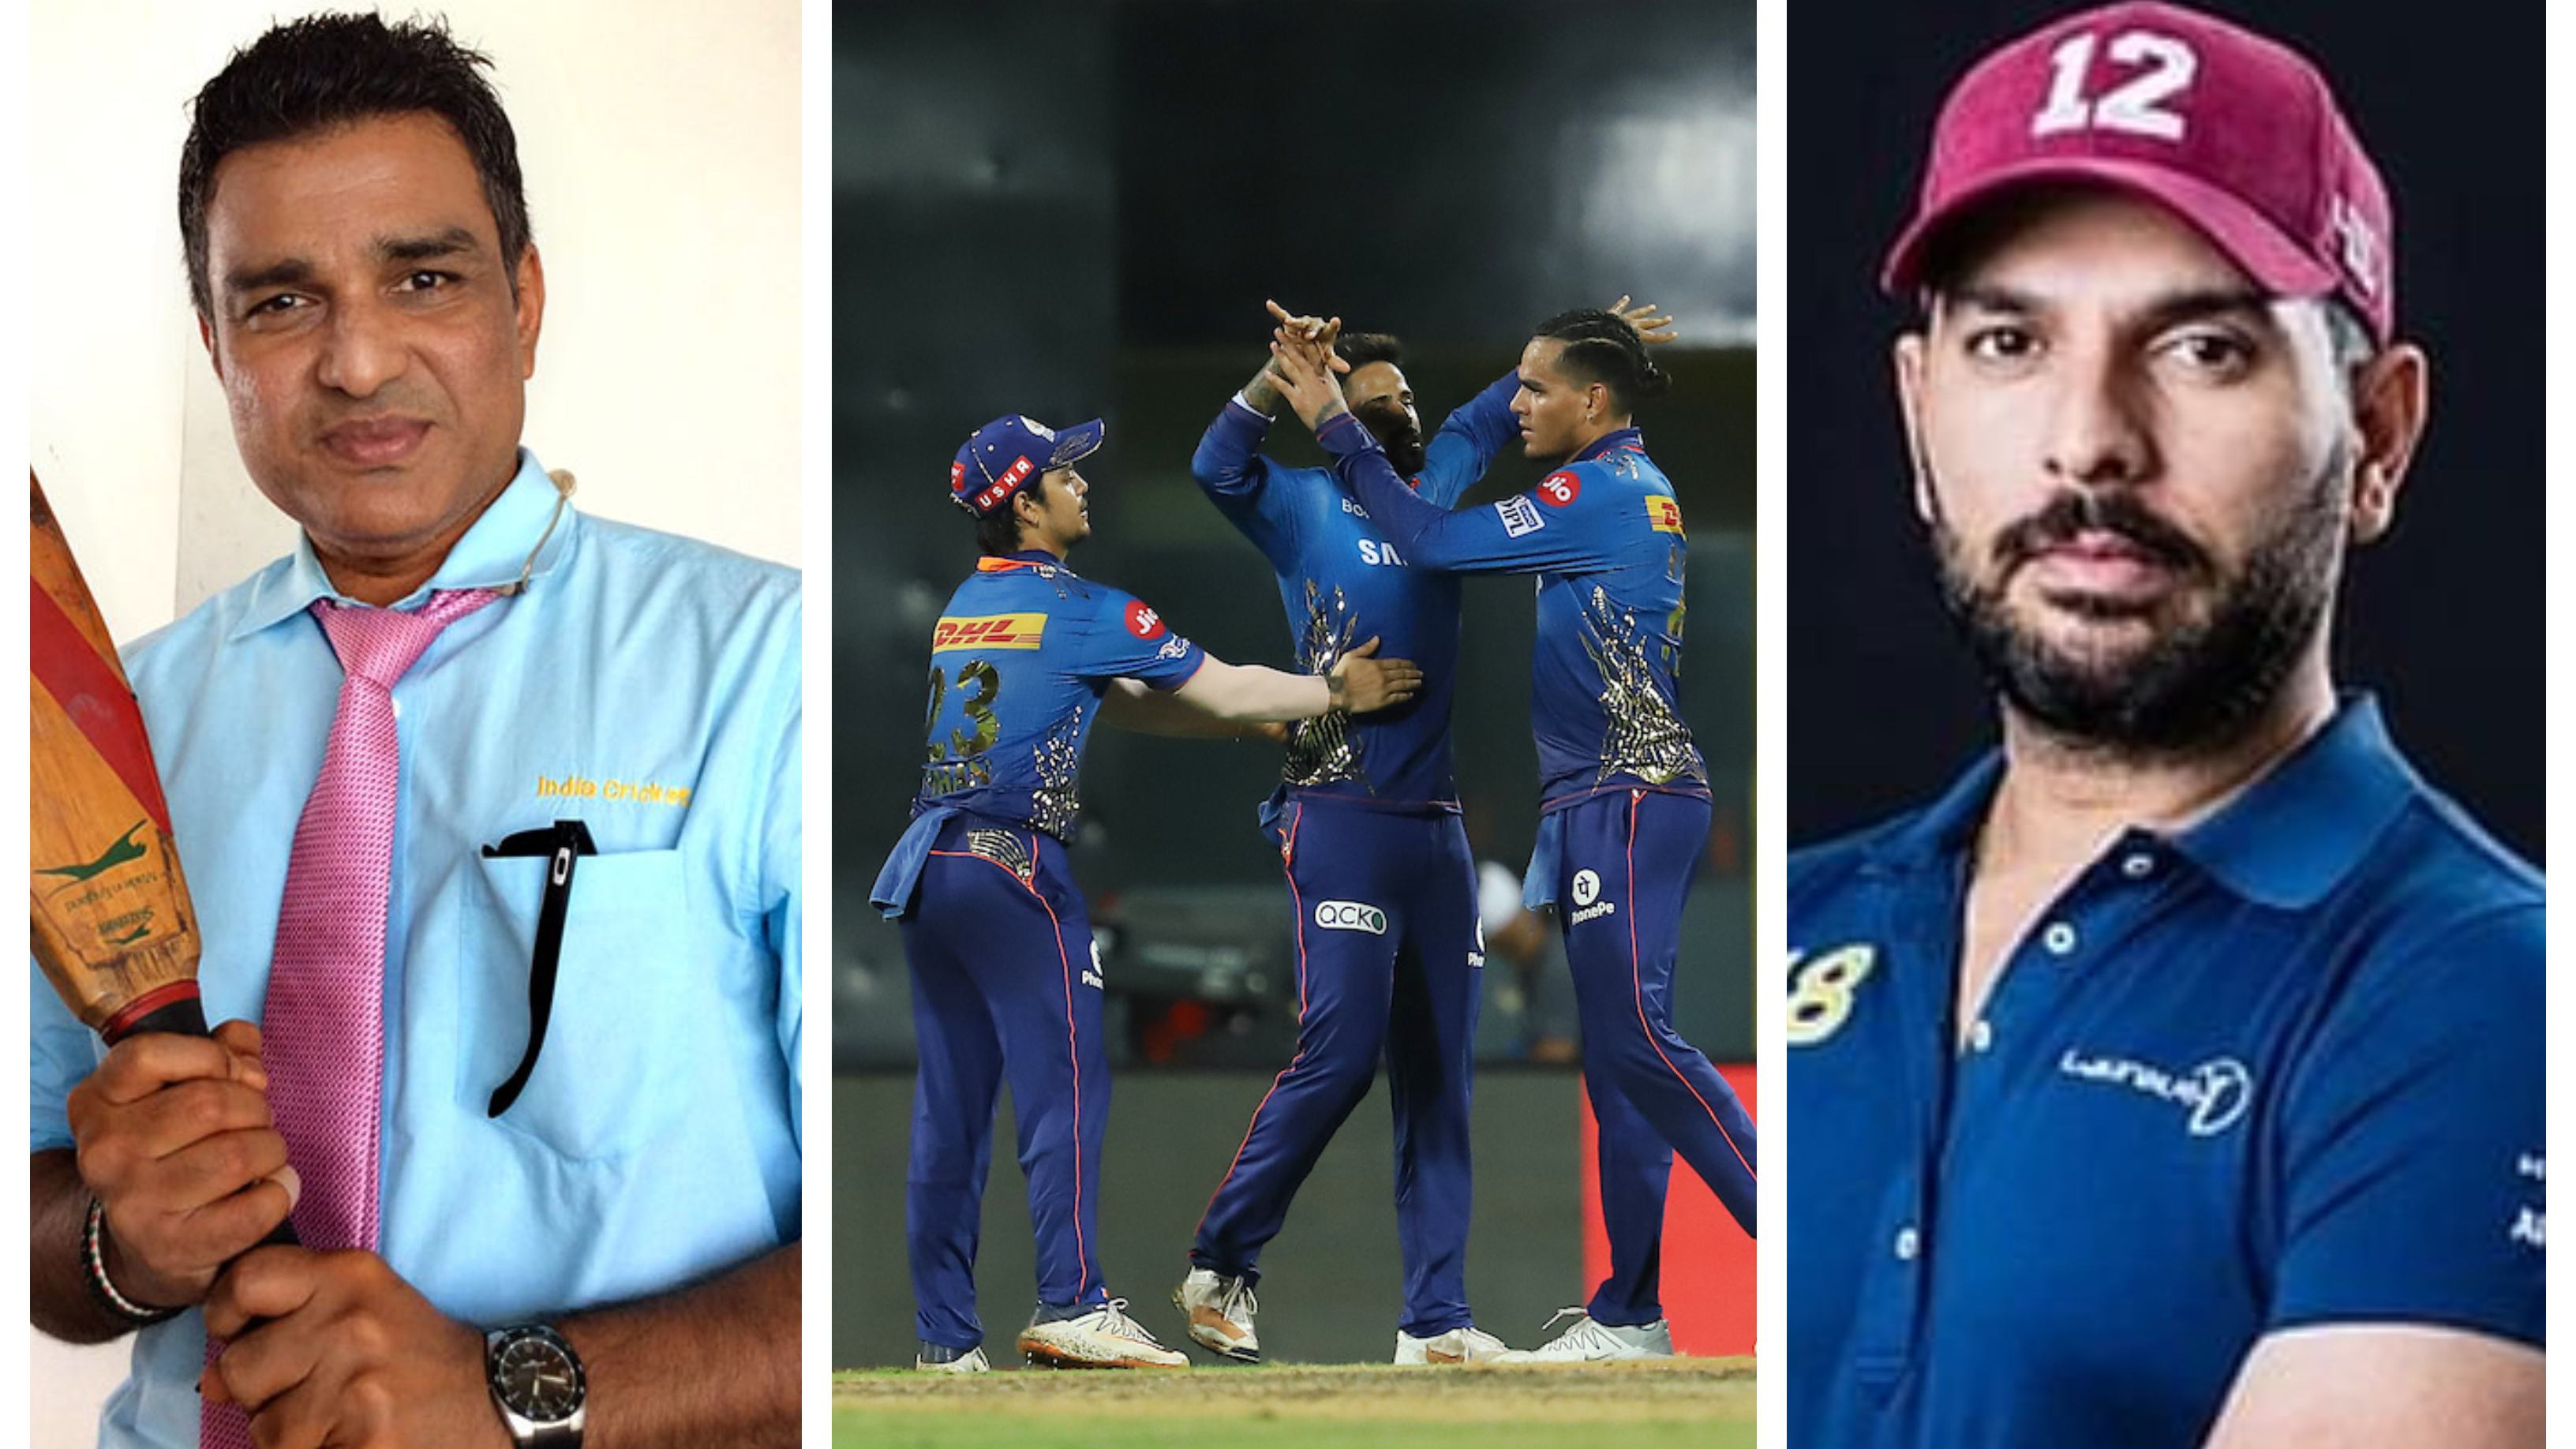 IPL 2021: Cricket fraternity reacts in awe as MI bowlers pull off another heist while defending a modest total